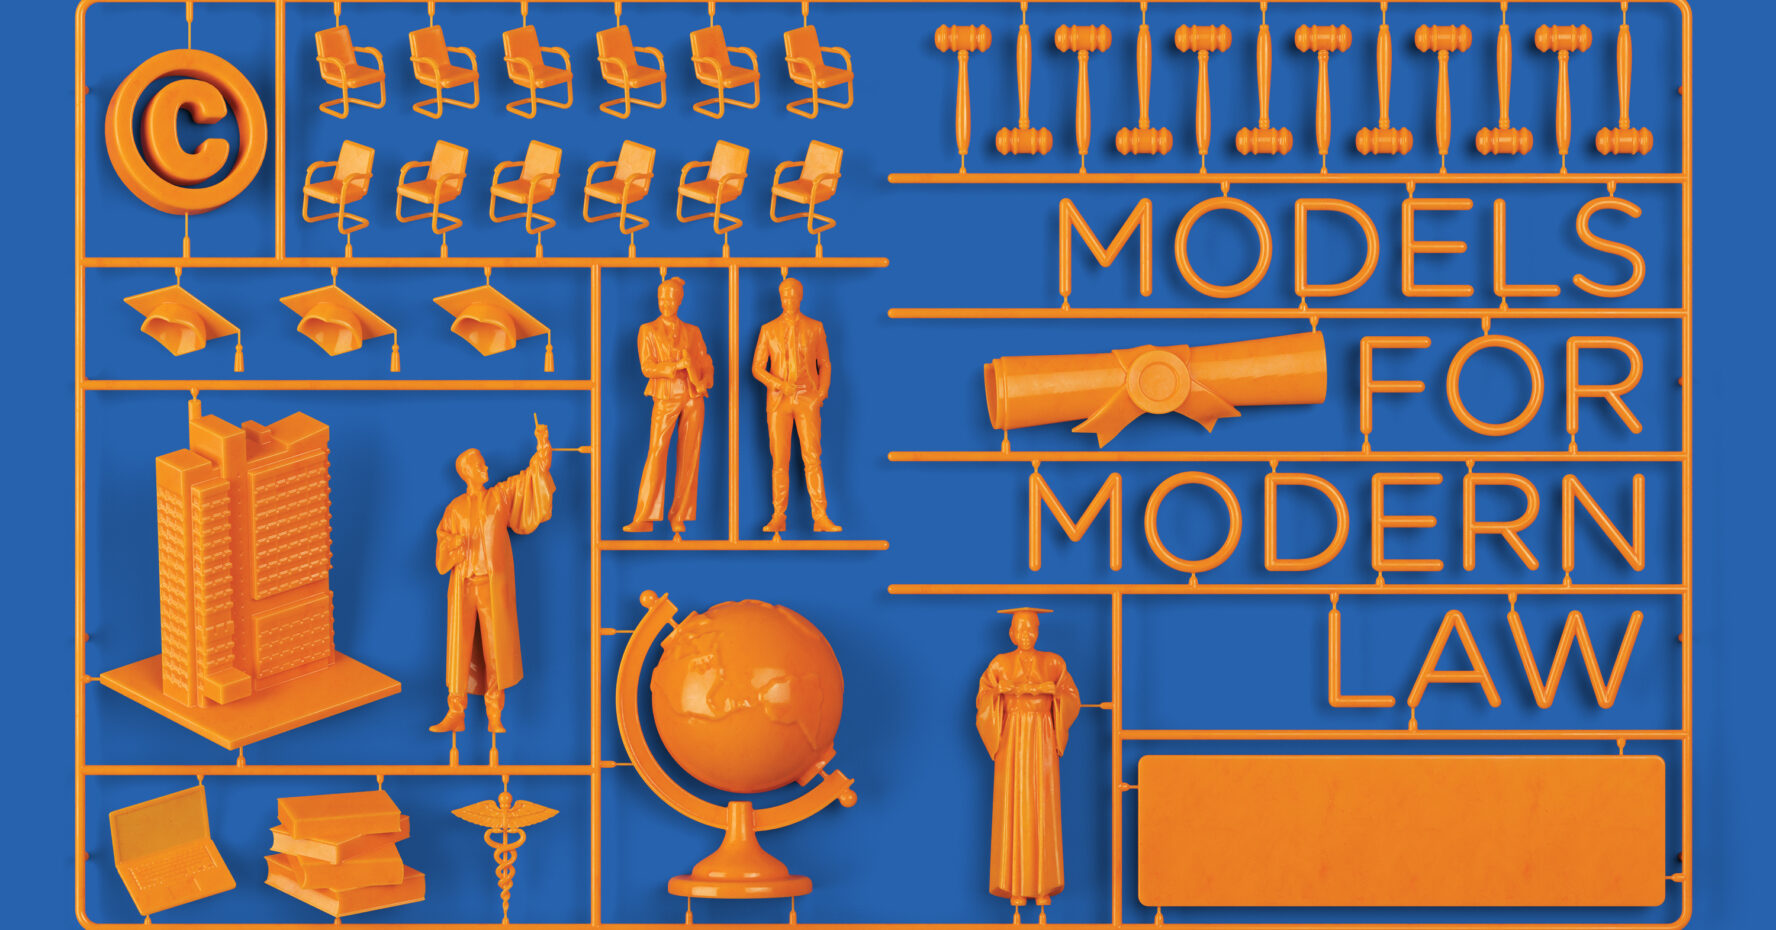 An image from inside The Record, spring 2023: An orange snap model kit with gavels, jury seats, law graduates, a globe, the BU Law tower, and other items related to the practice of law sit against a blue background.